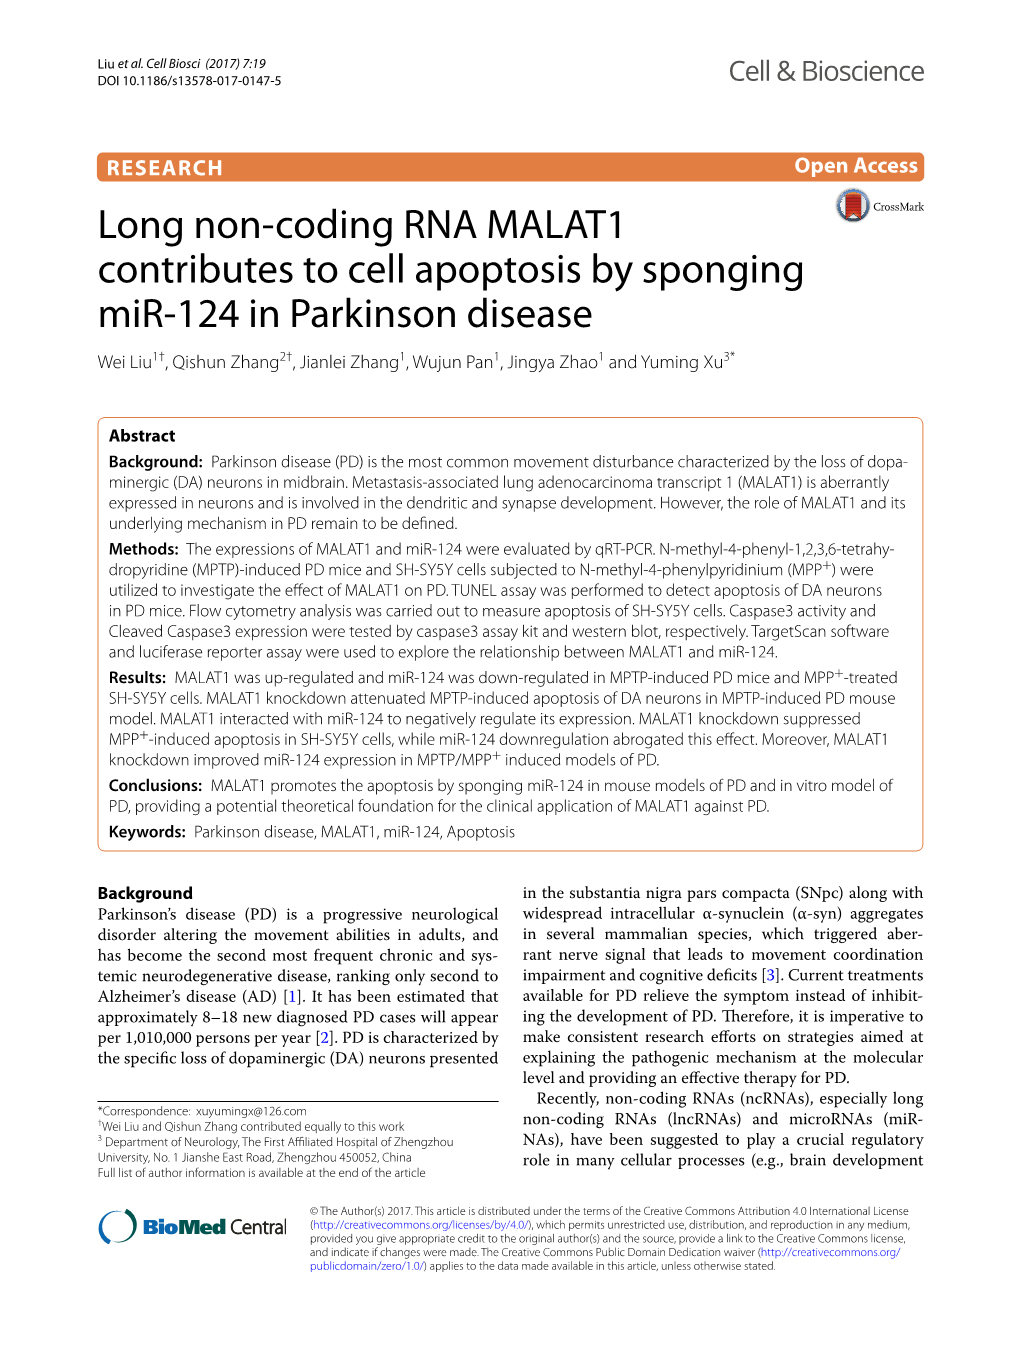 Long Non-Coding RNA MALAT1 Contributes to Cell Apoptosis by Sponging Mir-124 in Parkinson Disease